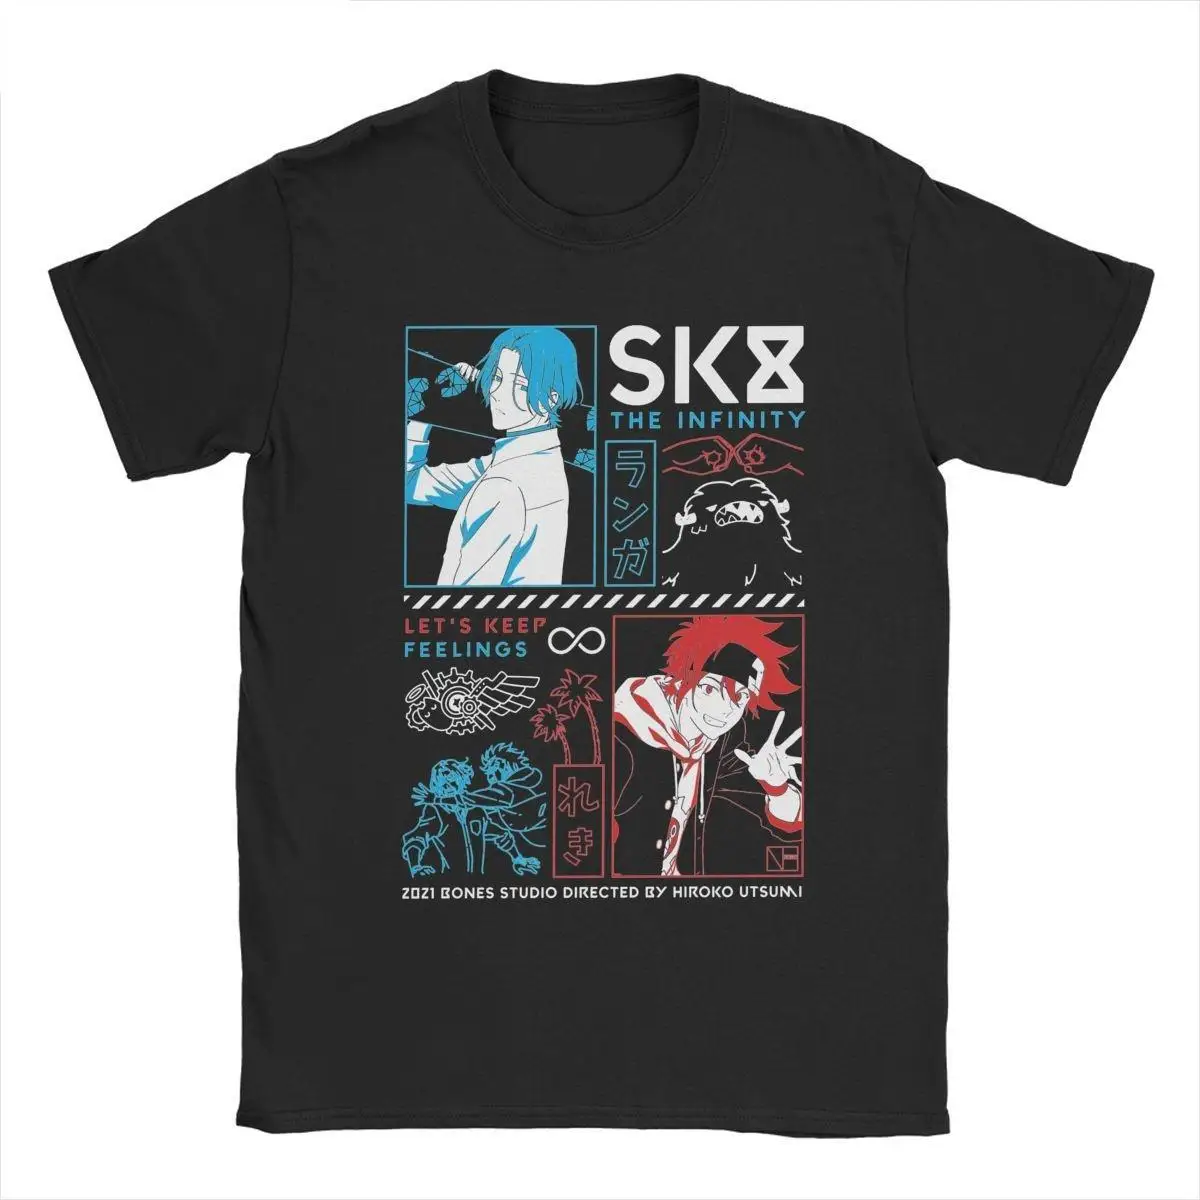 SK8 The Infinity Reki & Langa T-Shirts for Men Funny Pure Cotton Tees Round Neck Short Sleeve T Shirt Big Size Tops